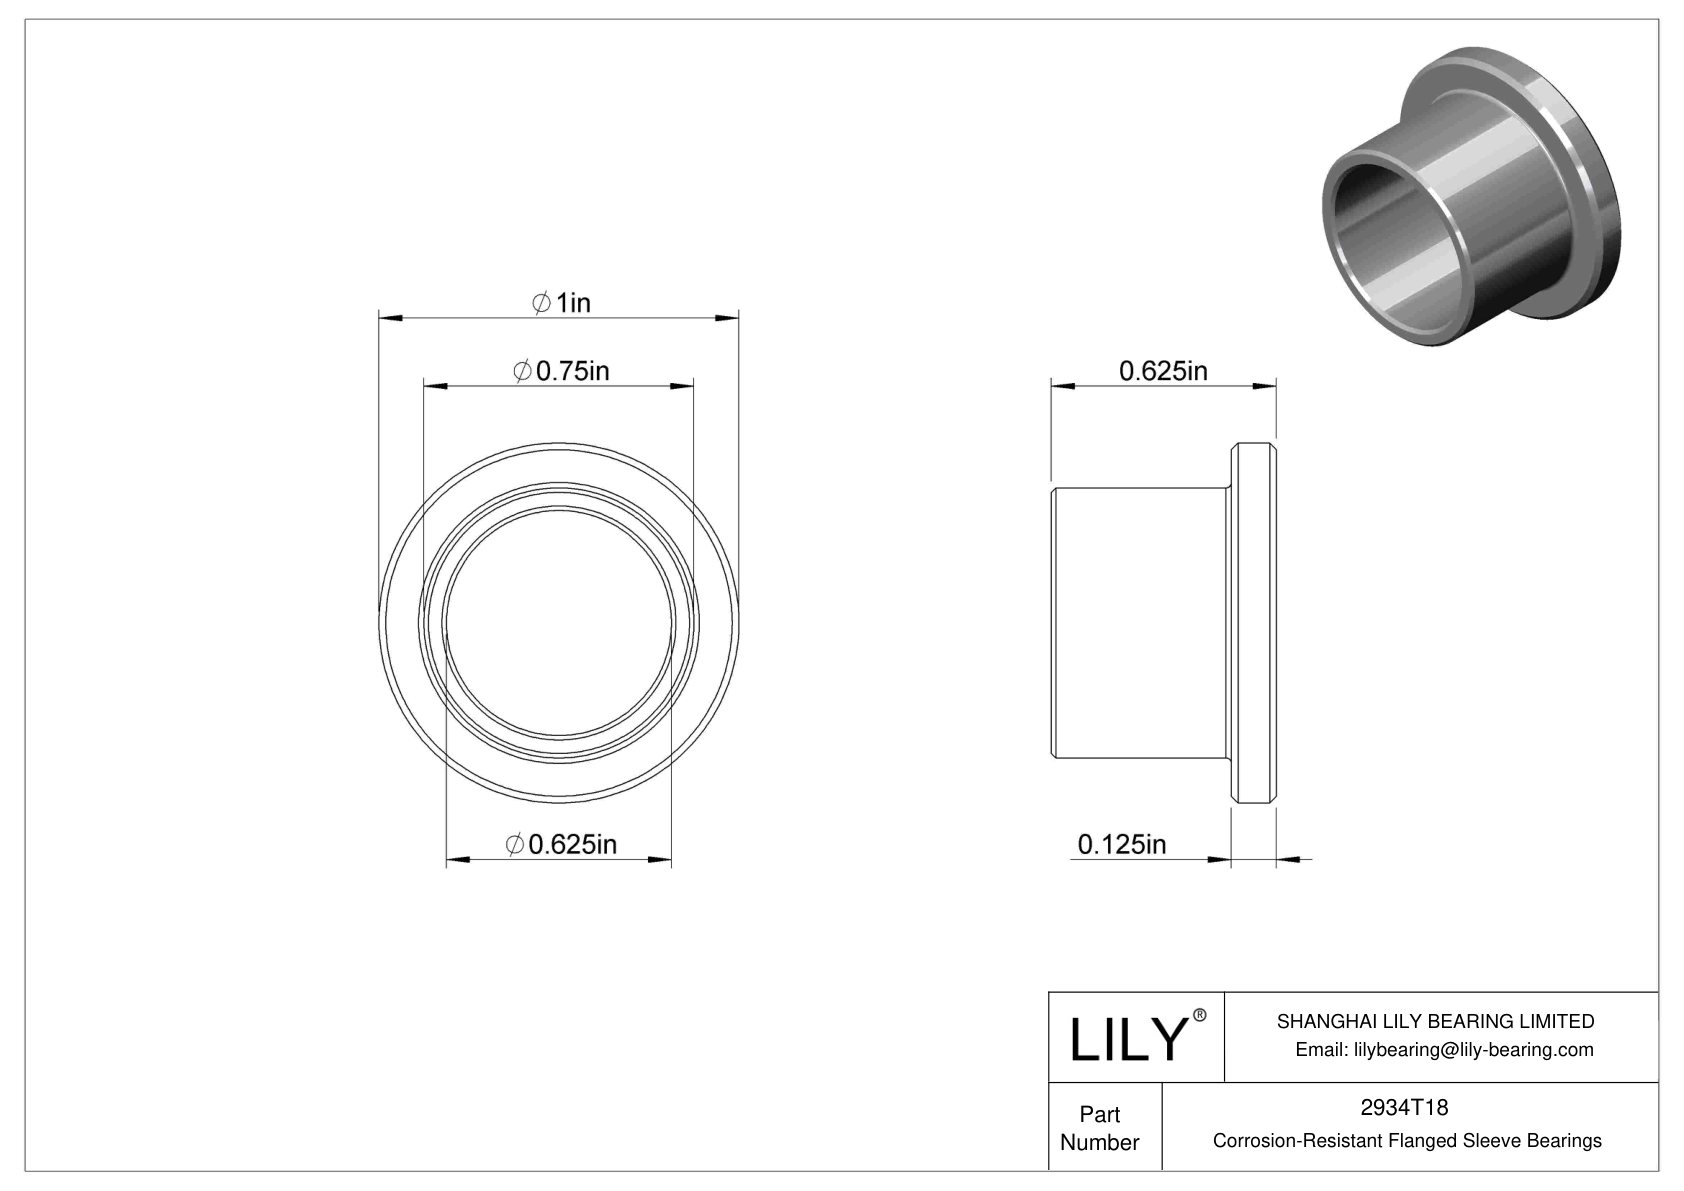 CJDETBI Corrosion-Resistant Flanged Sleeve Bearings cad drawing